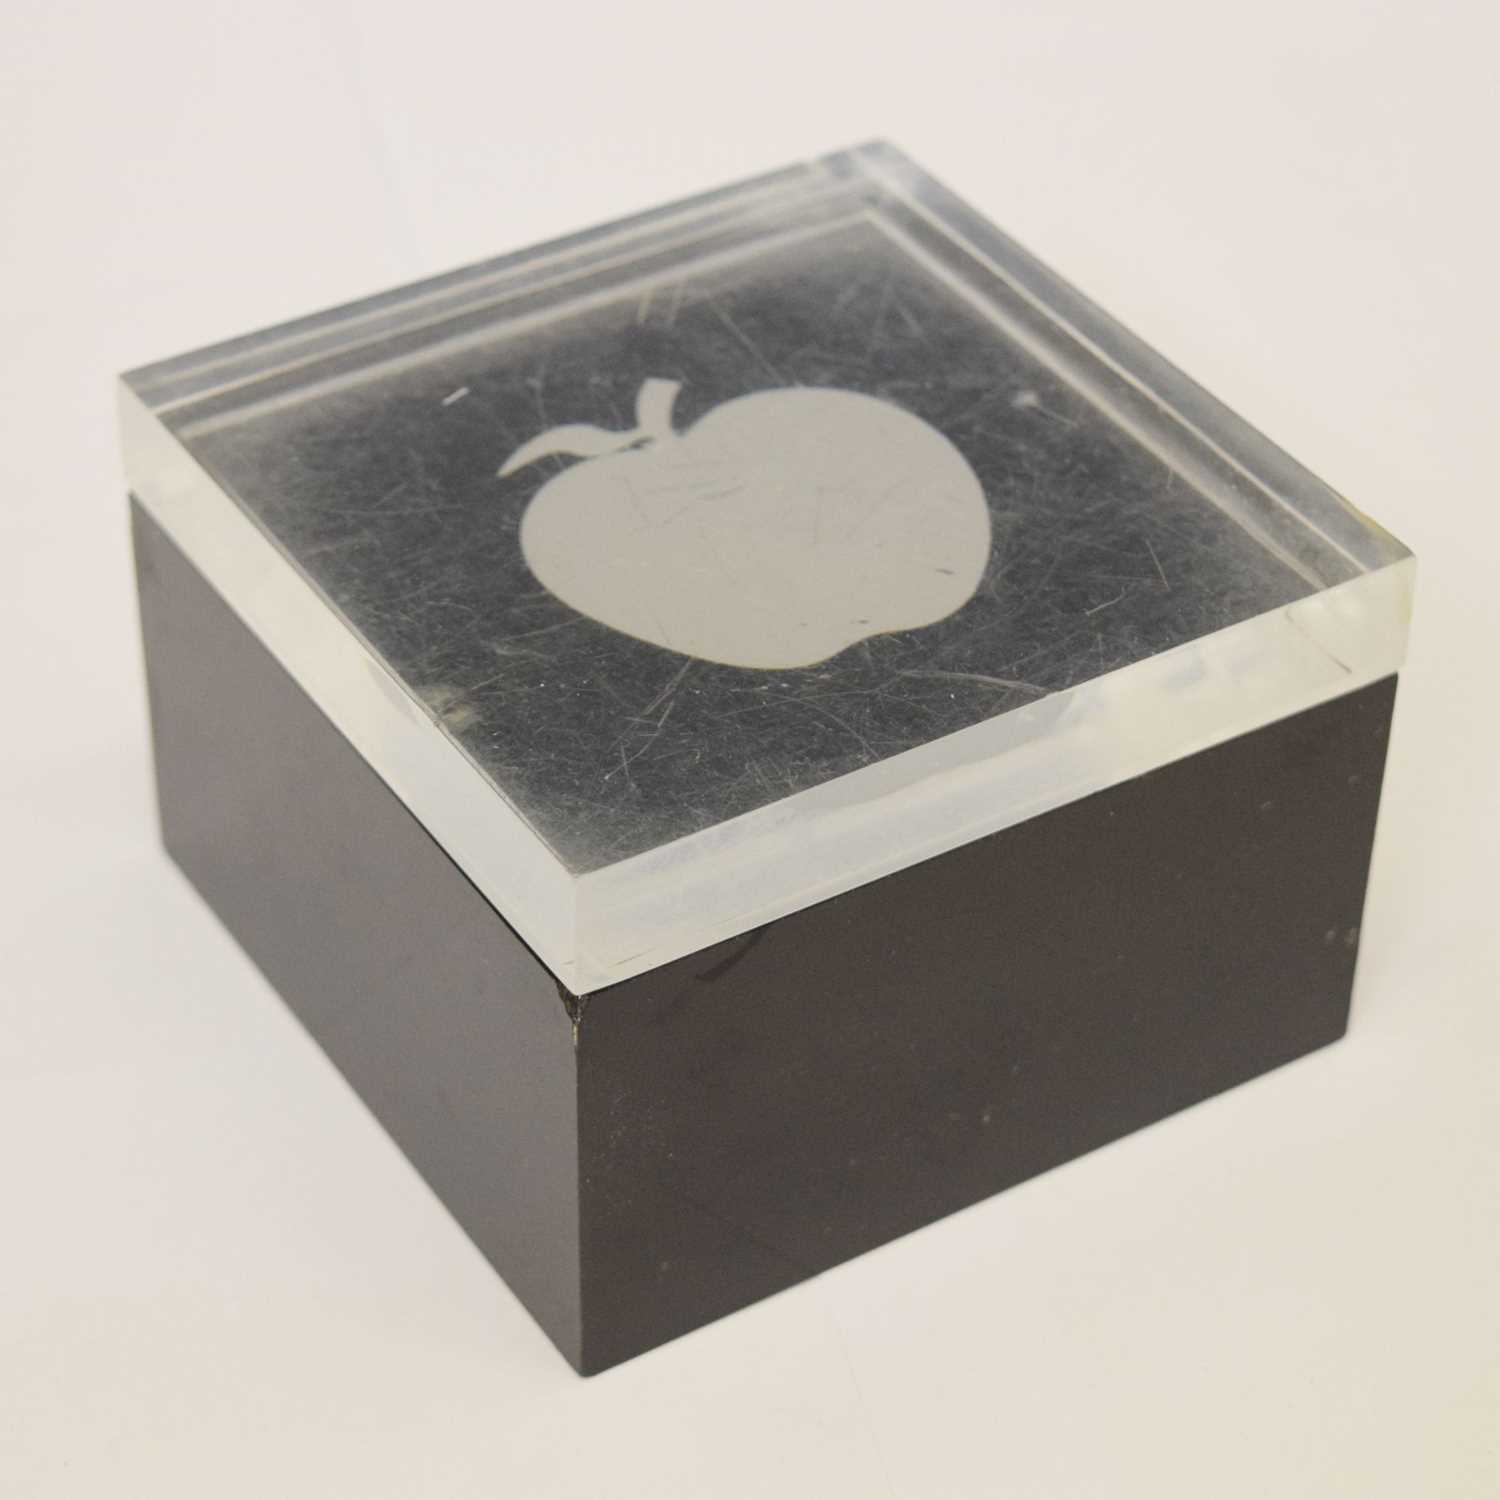 Apple Records promotional lucite box